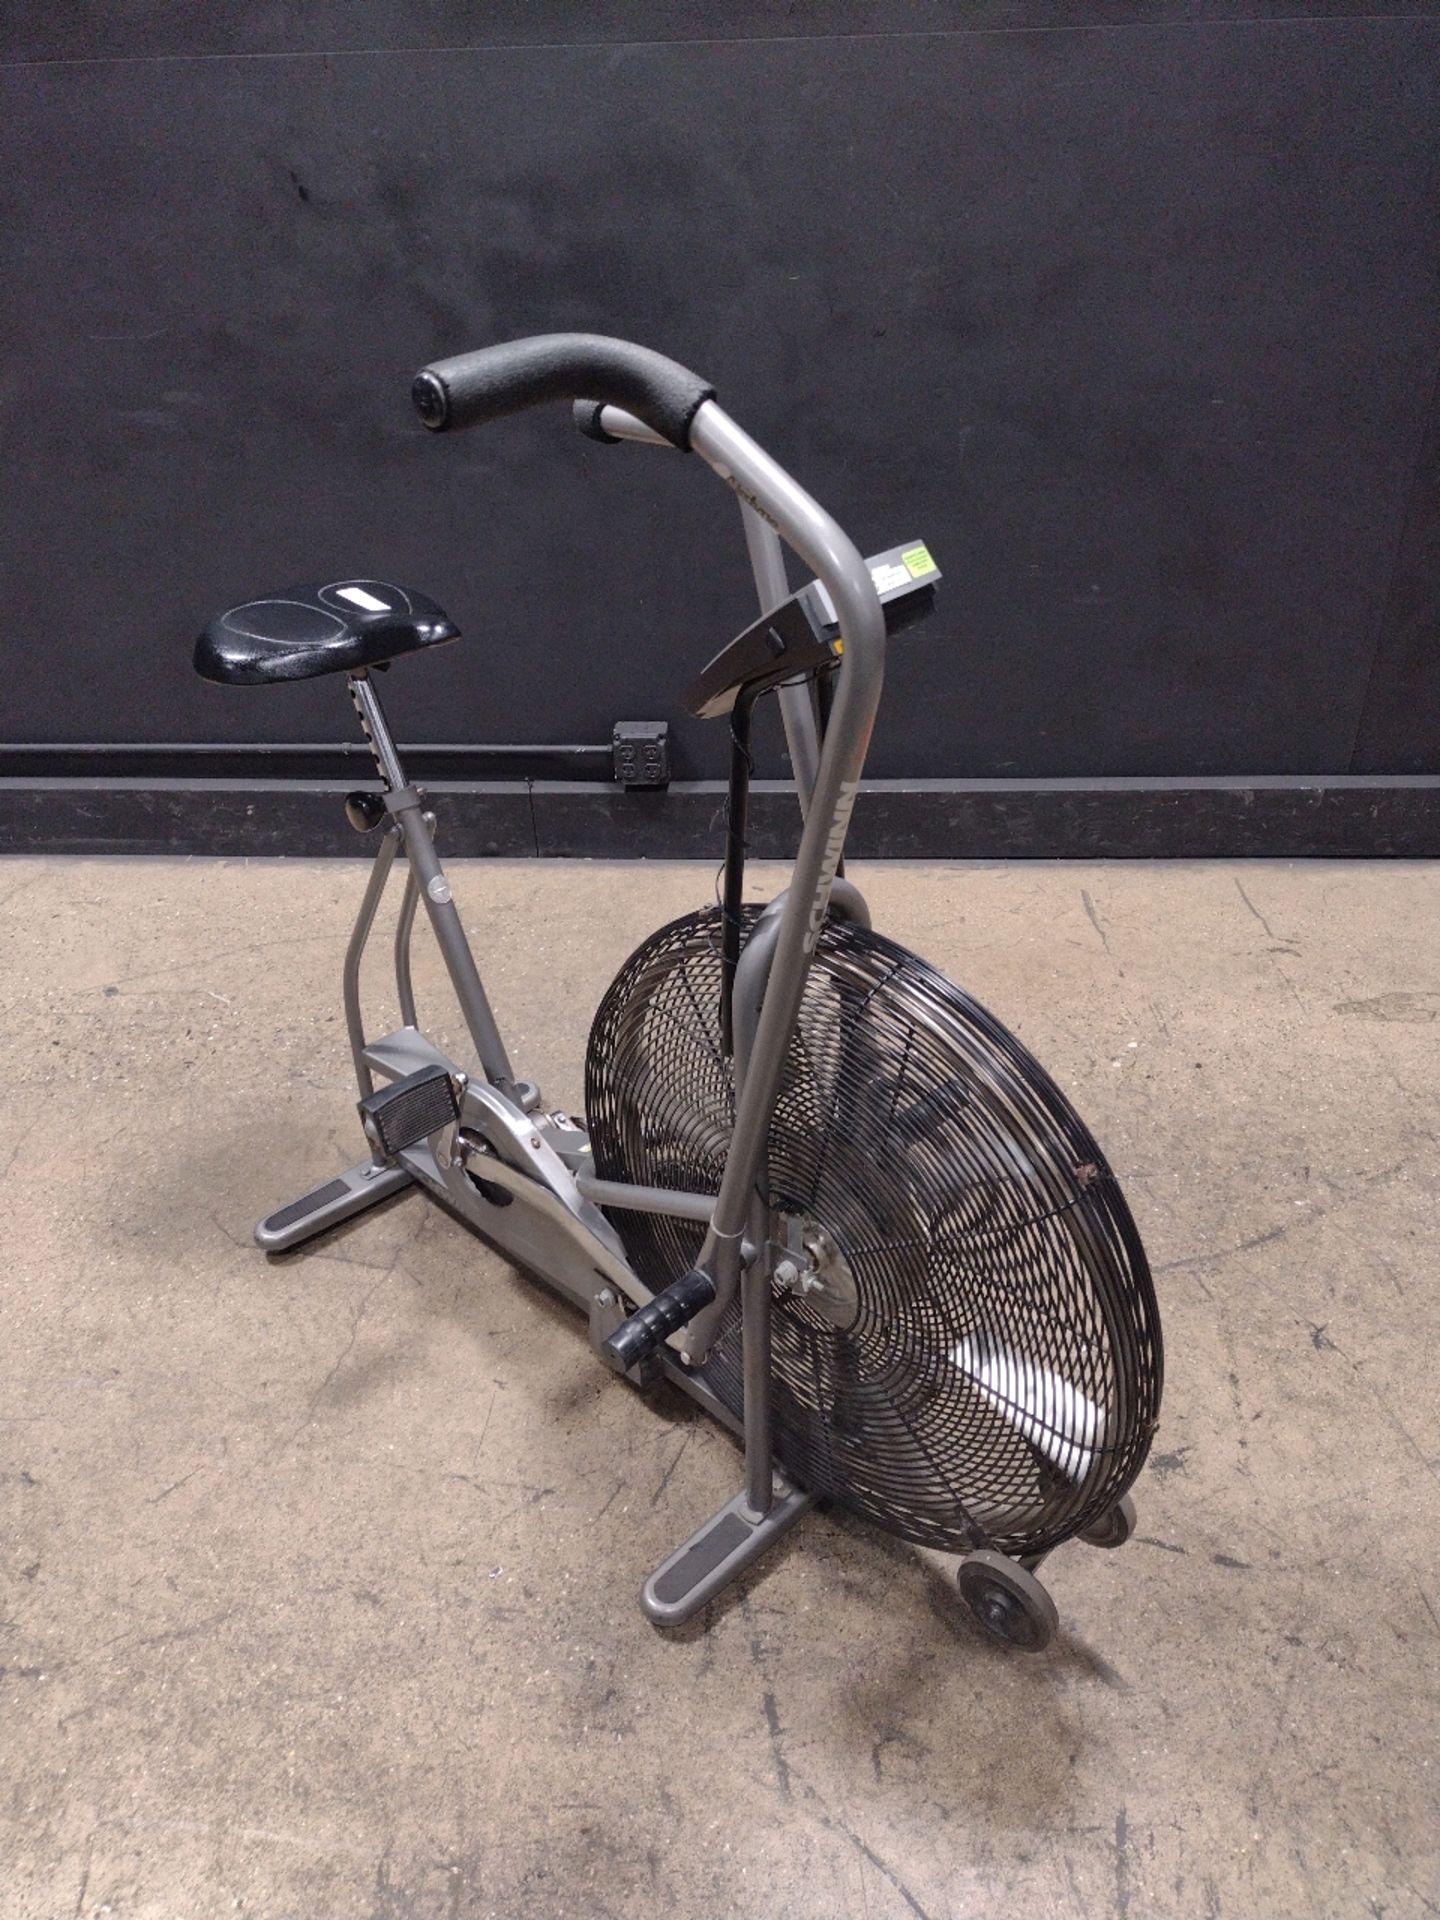 SCHWINN AIRDYNE EXERCISE BIKE (LOCATED AT 3325 MOUNT PROSPECT ROAD, FRANKLIN PARK, IL, 60131) - Image 3 of 4